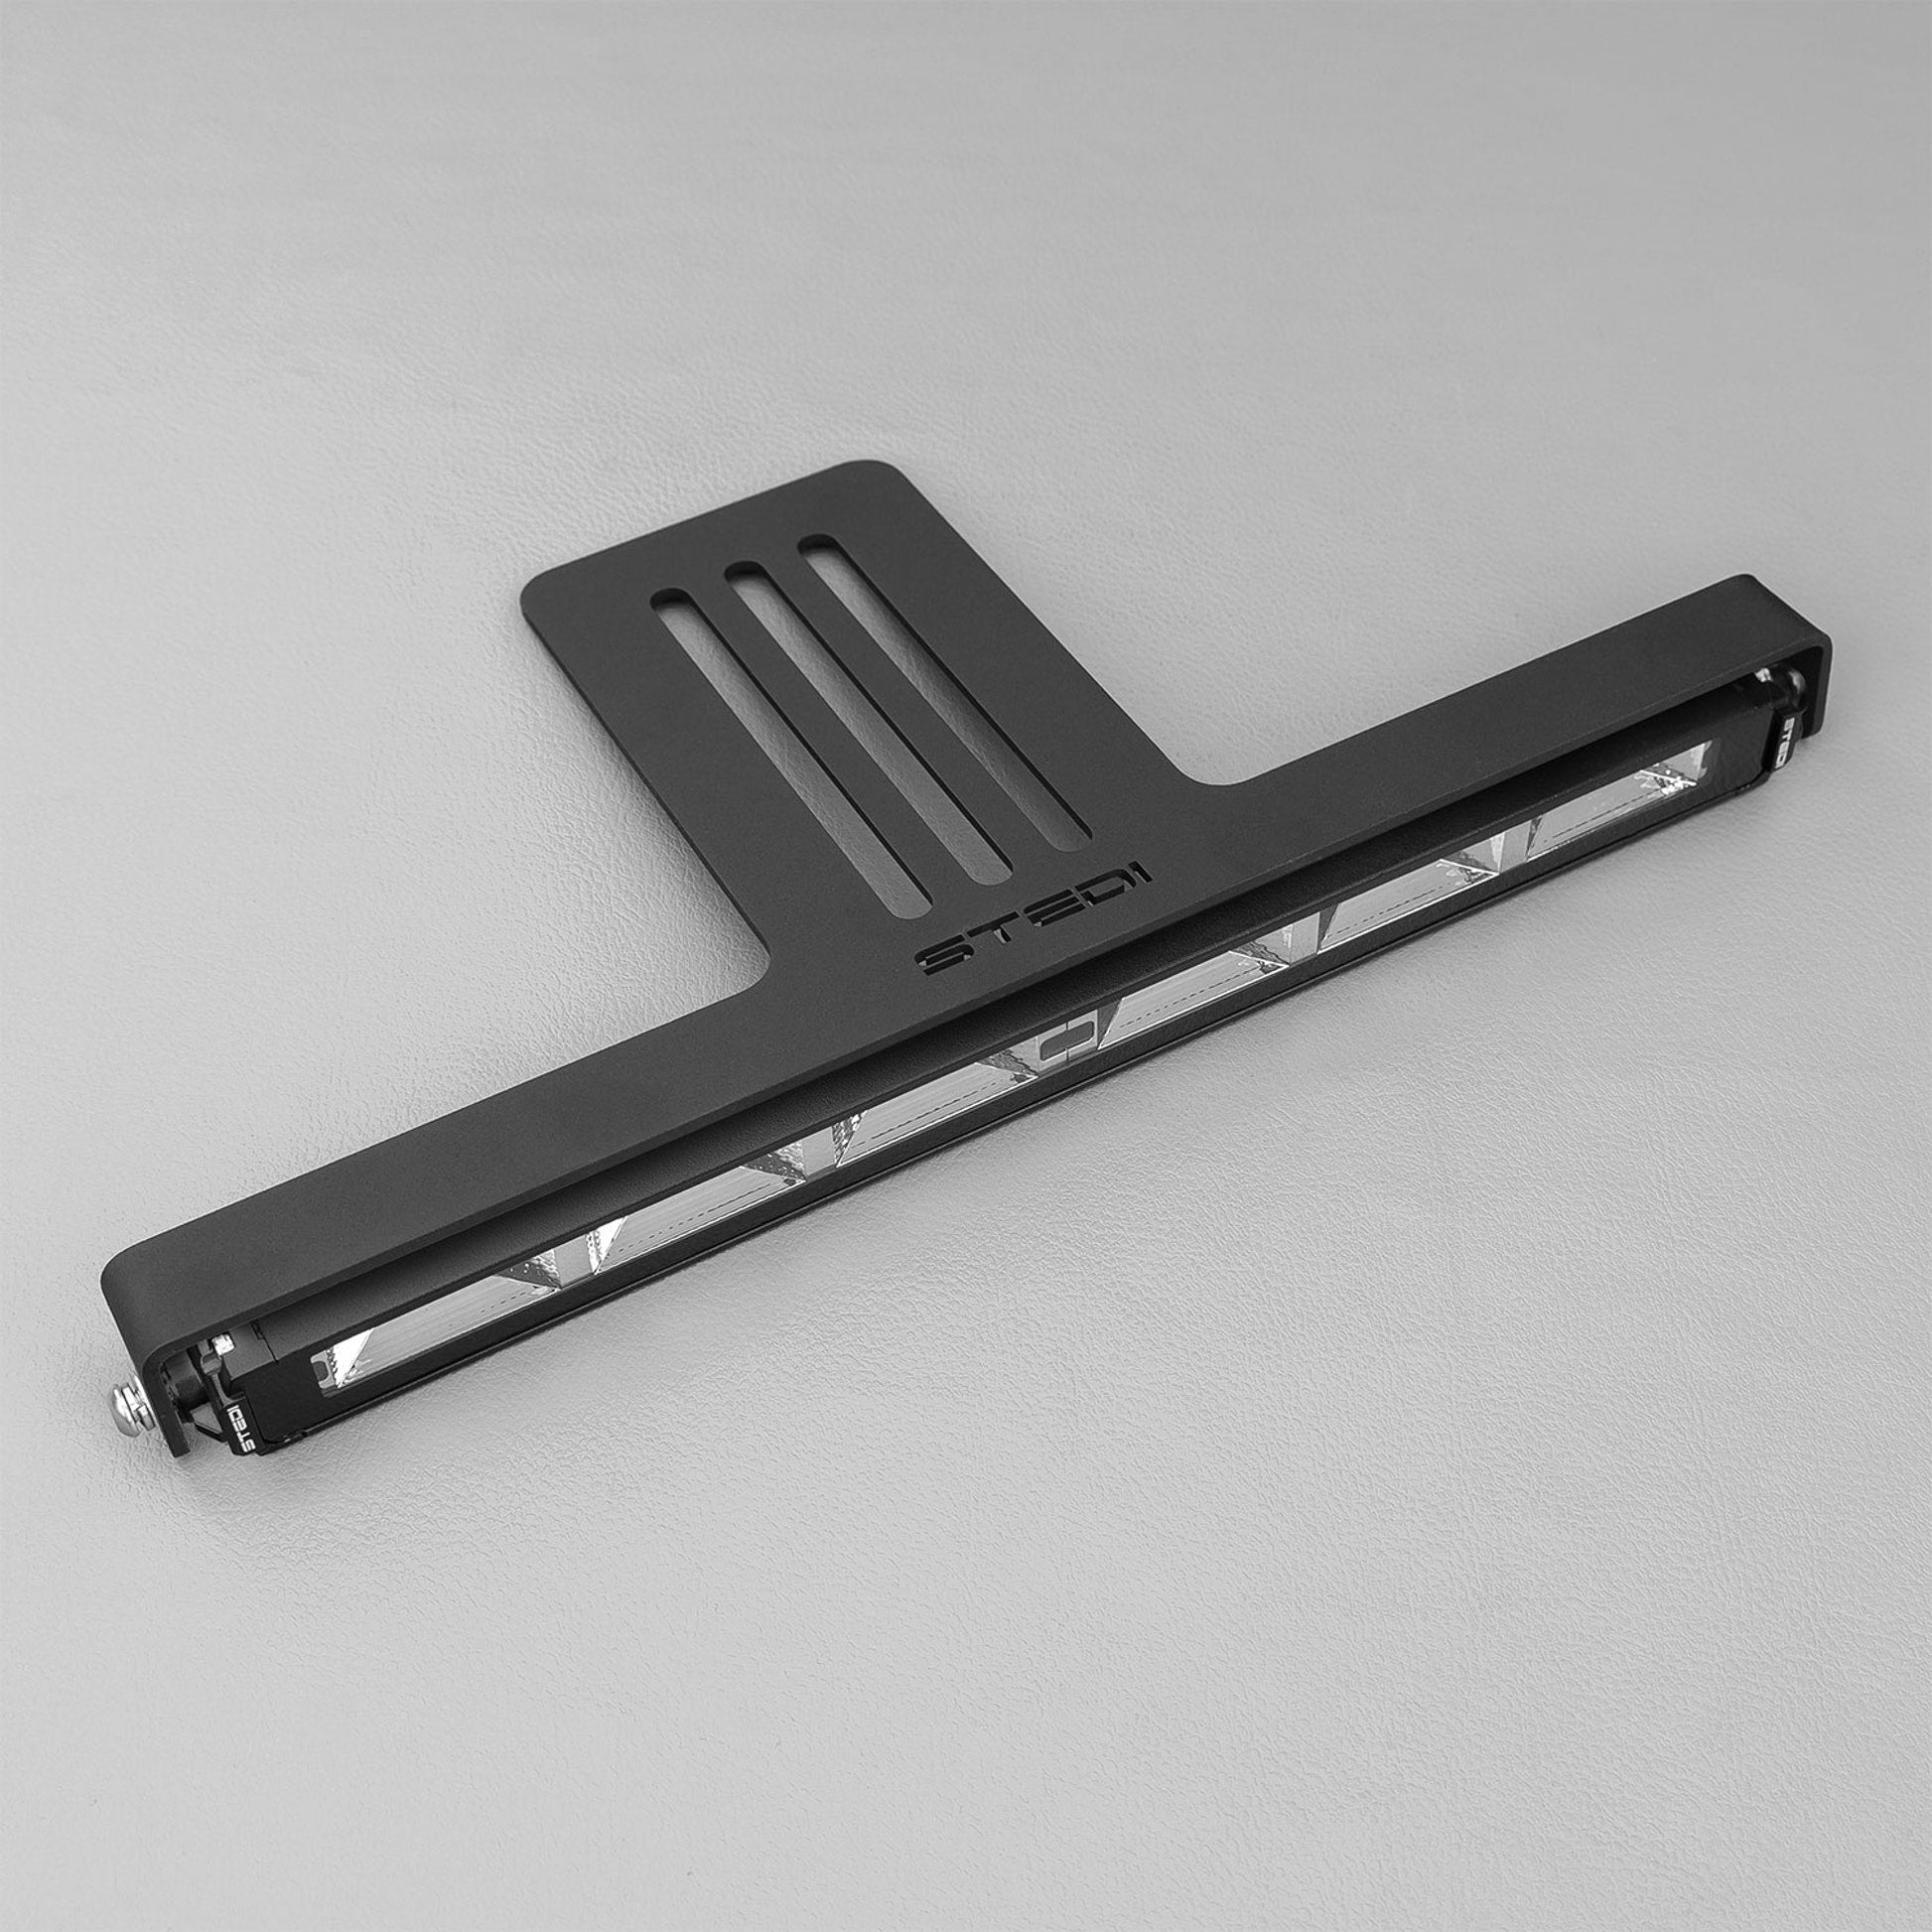 STEDI roof rack attachment (2 pieces) for LED Micro V2 Light Bar 13.9 inches (ARB, RhinoRack, etc.)